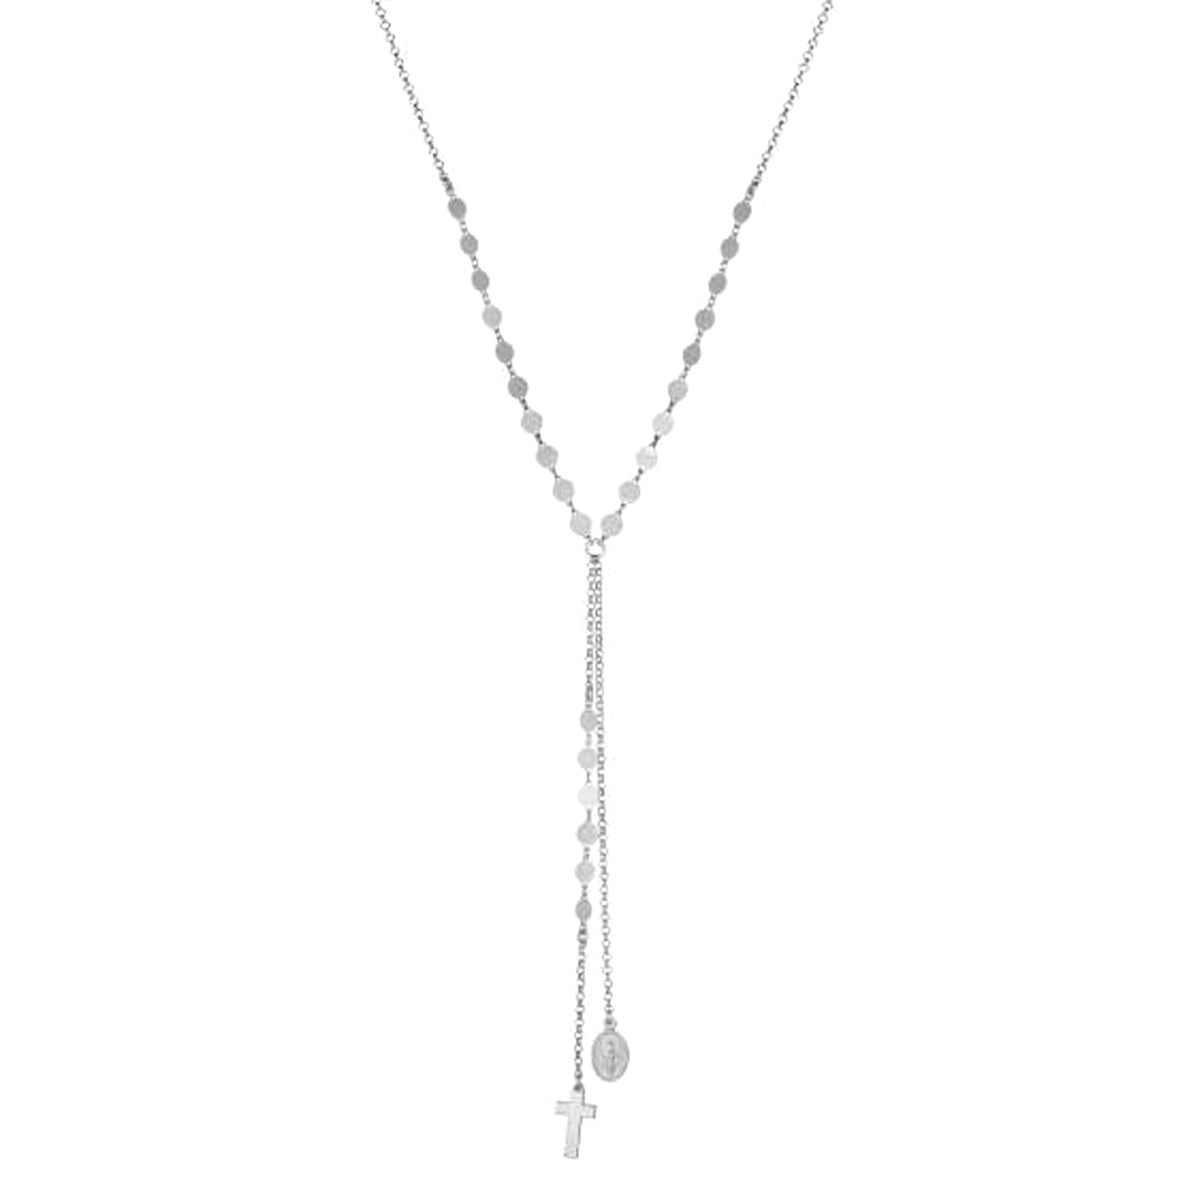 Sterling Silver Religious Cross Chain Necklace, 18" fine designer jewelry for men and women